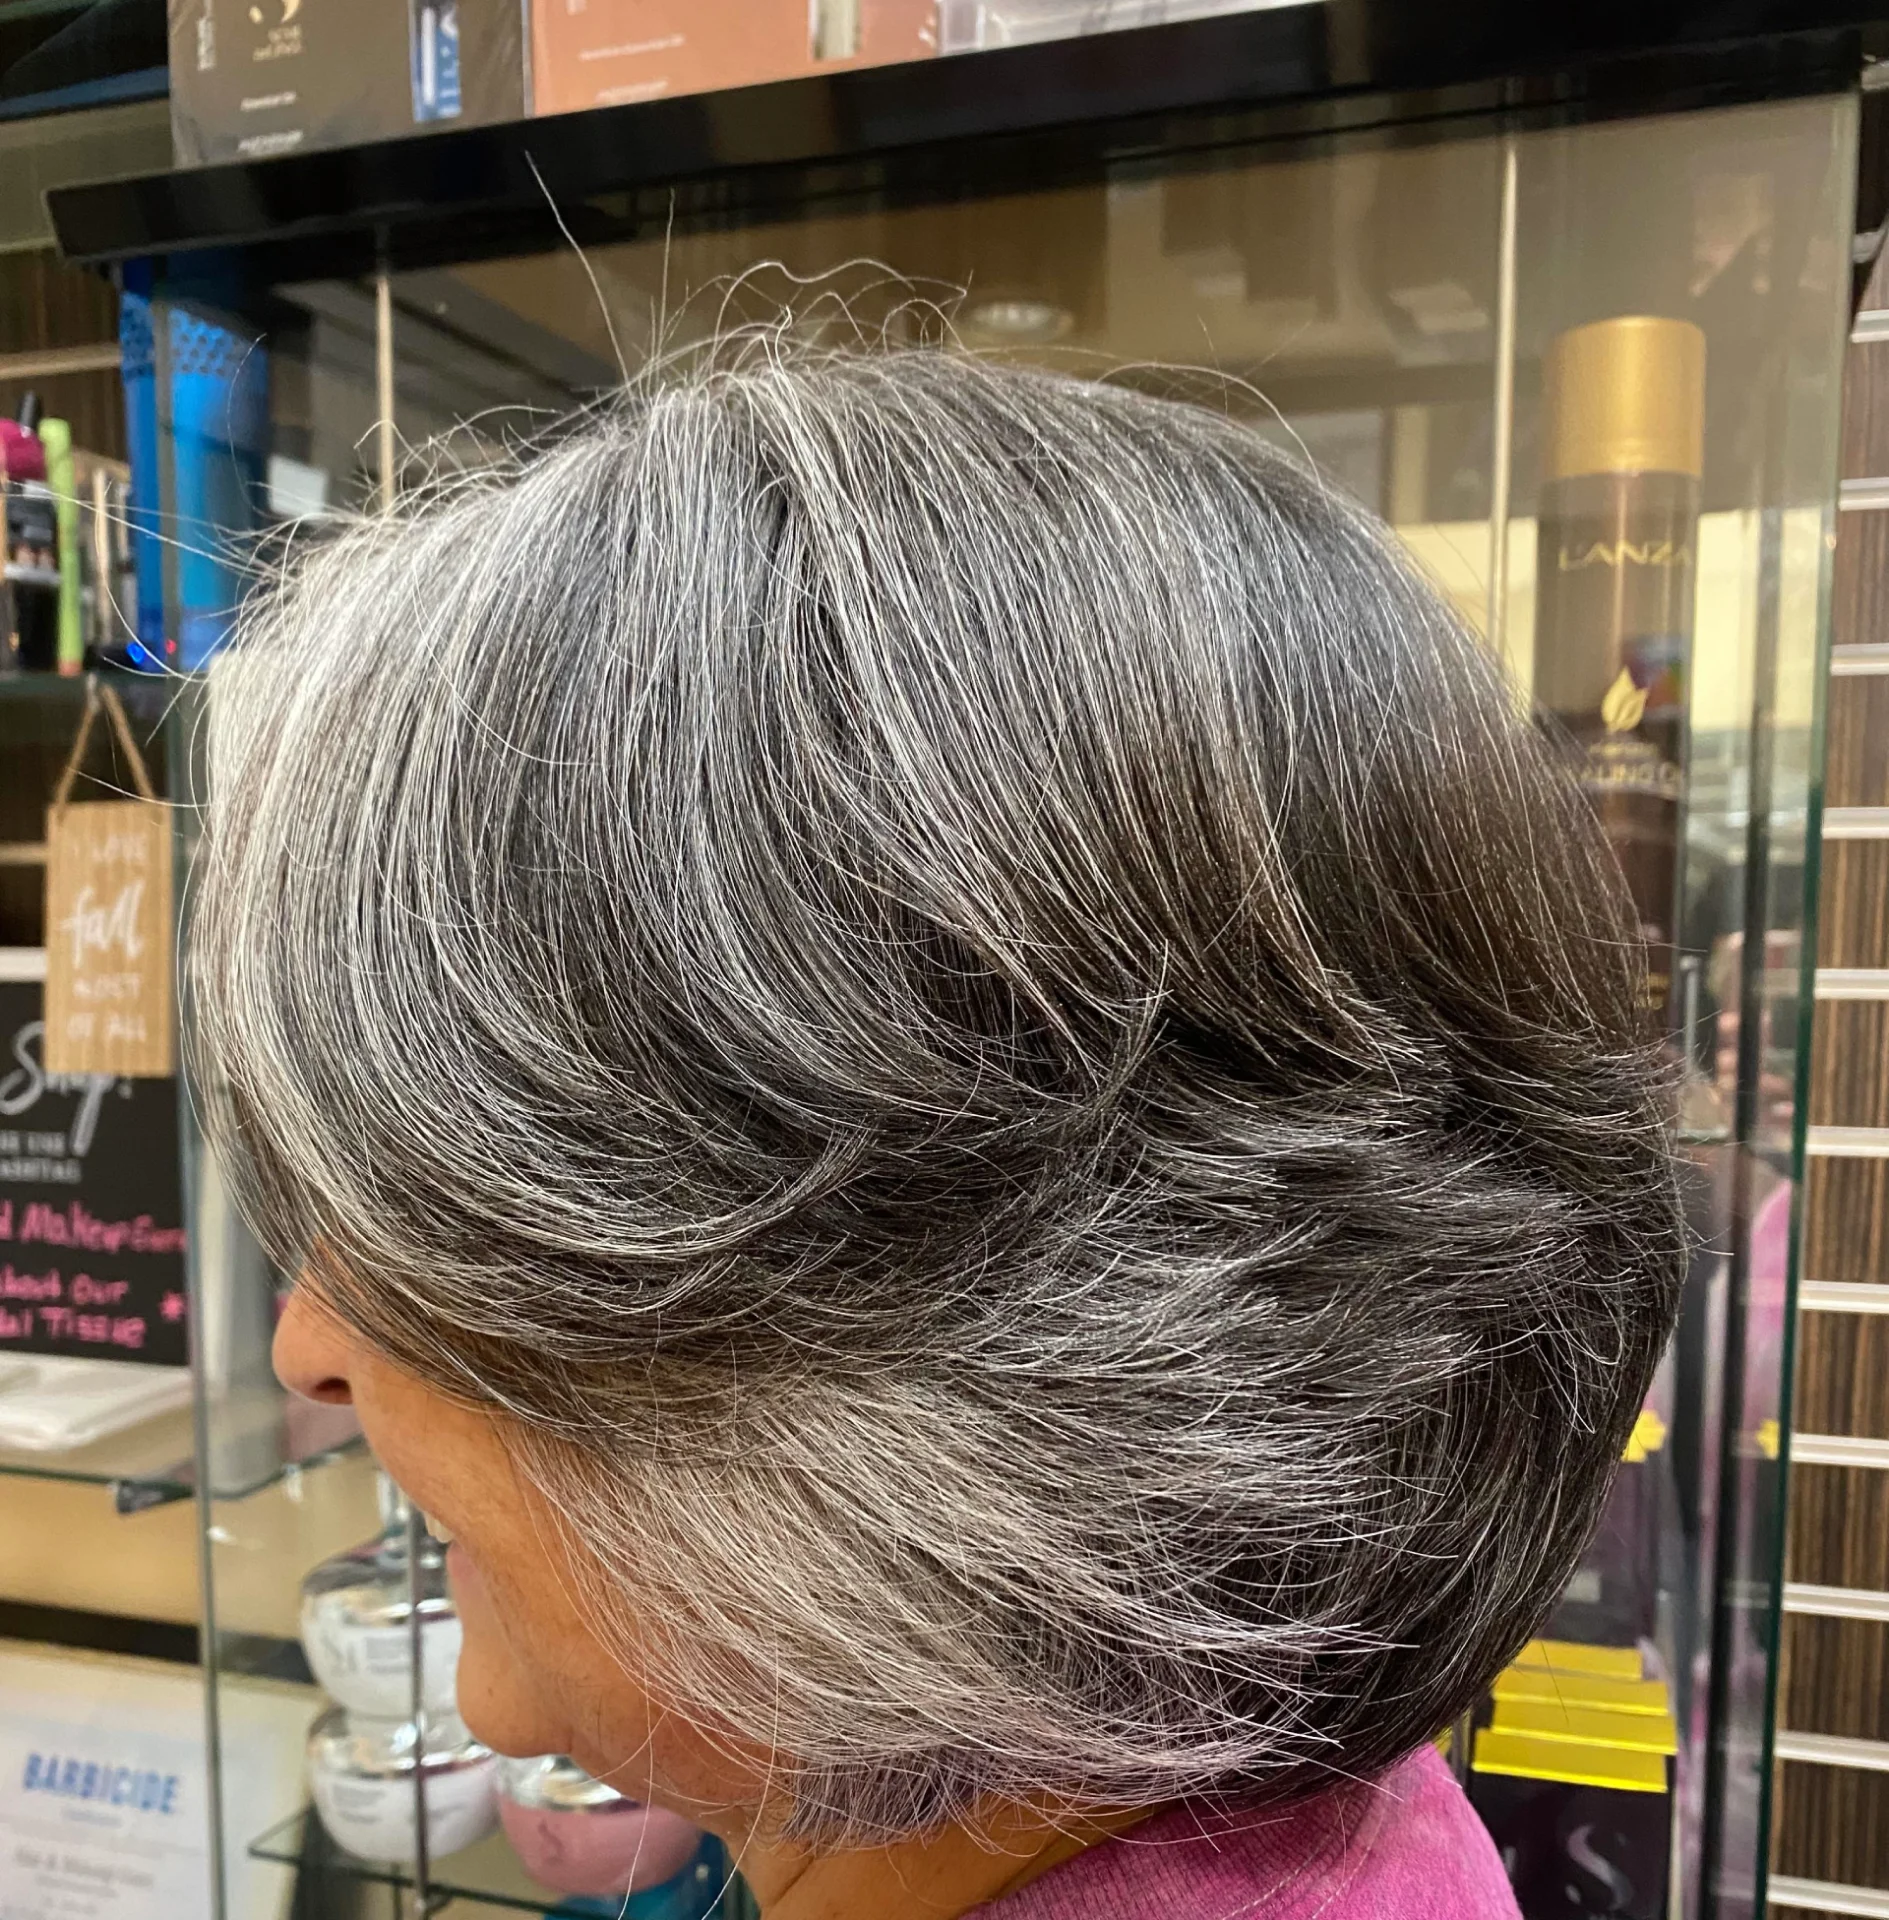 A woman with gray hair is looking at the camera.